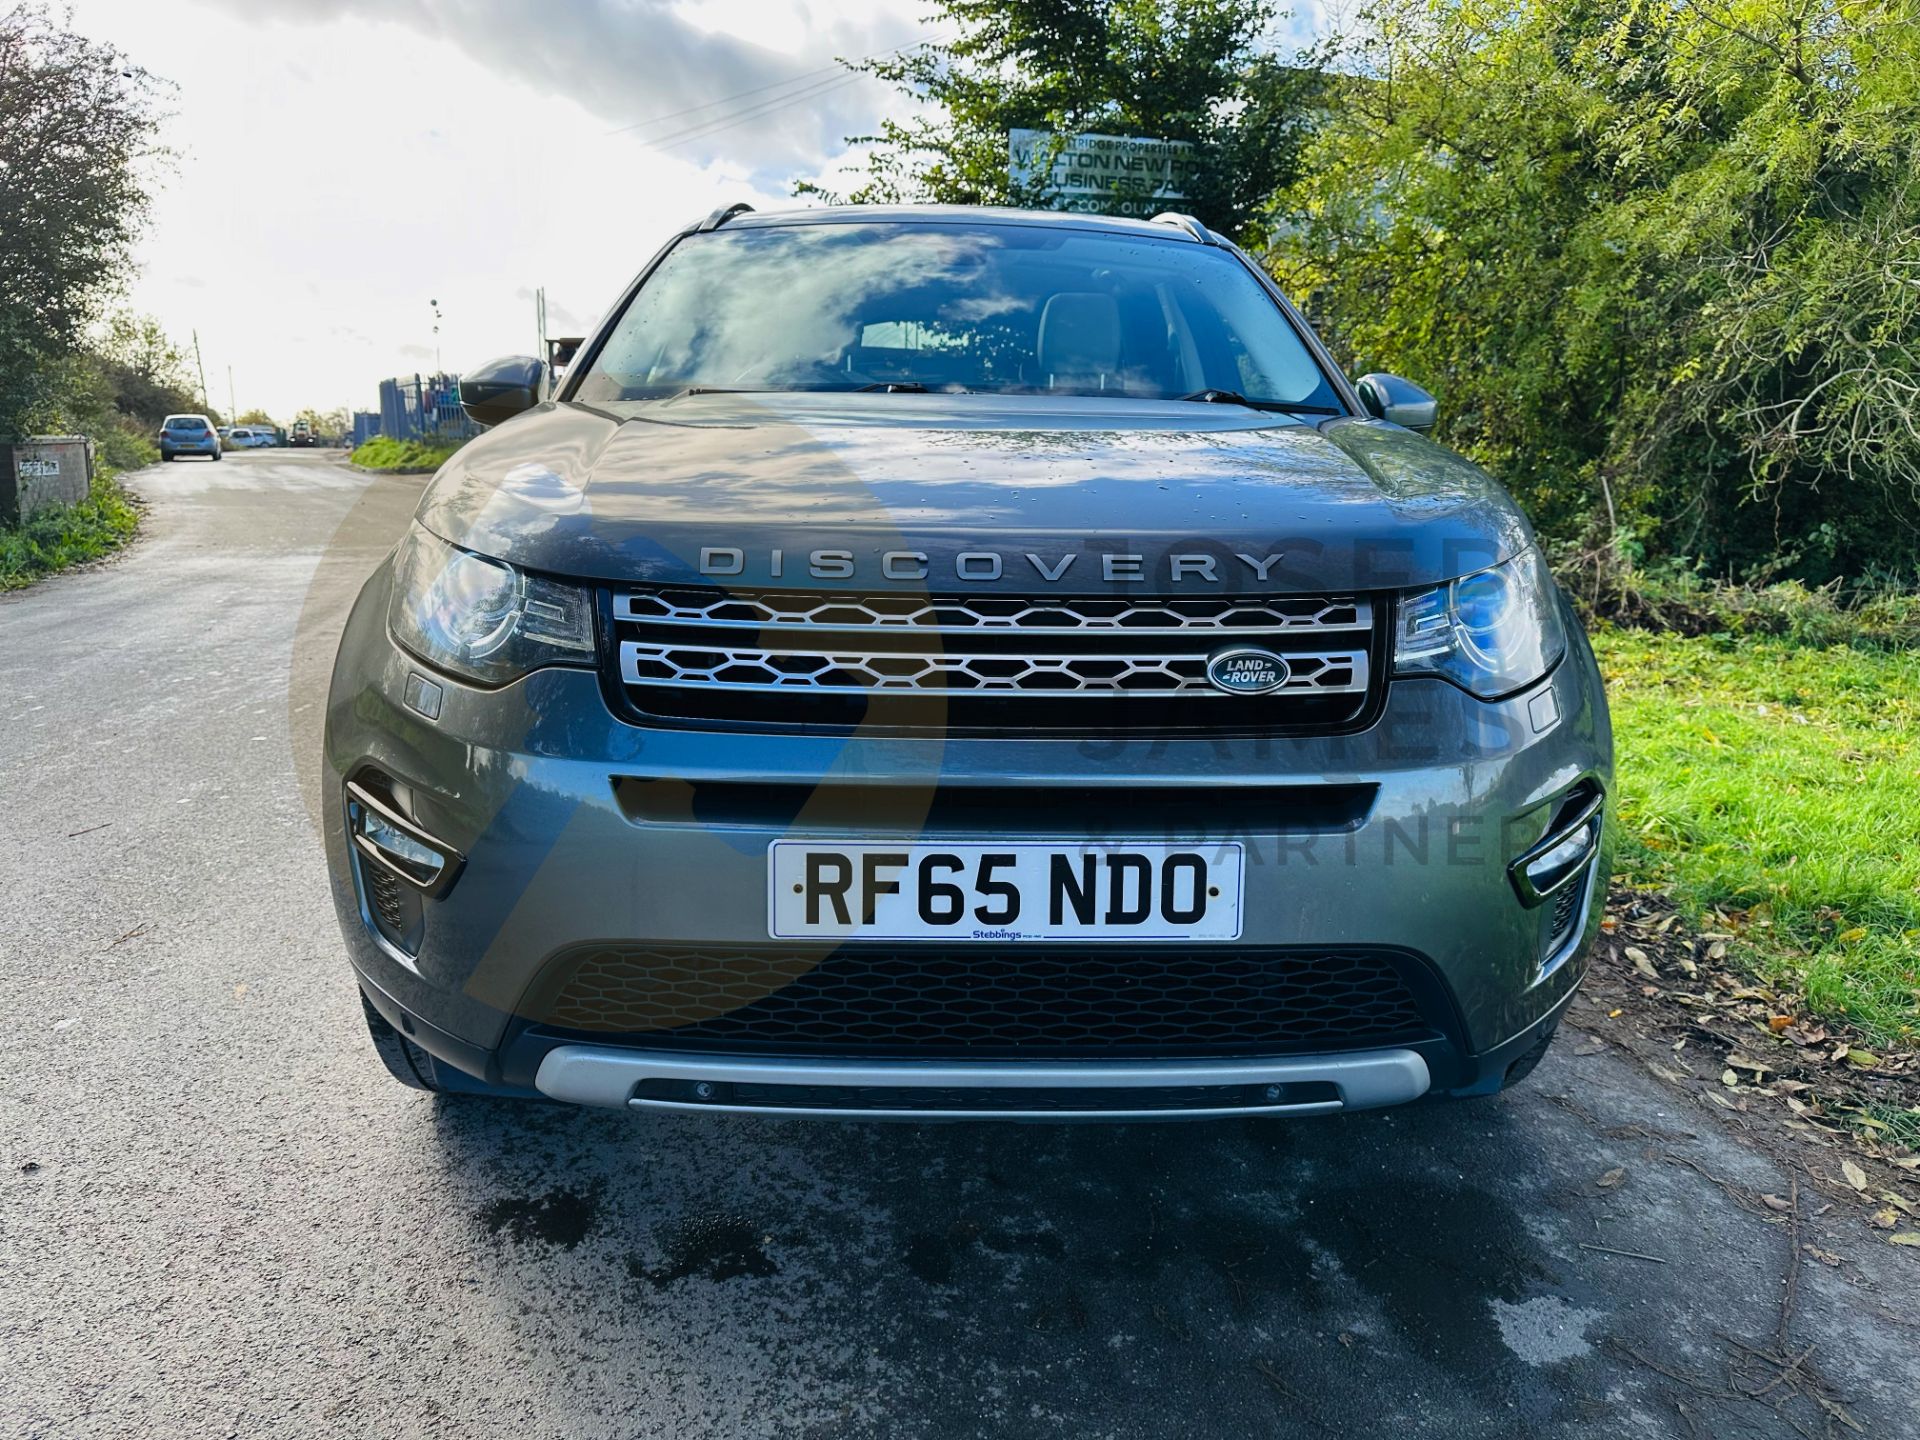 (ON SALE) LAND ROVER DISCOVERY SPORT *HSE EDITION* 7 SEATER SUV (2016 MODEL) 2.0 TD4-AUTO STOP/START - Image 4 of 56